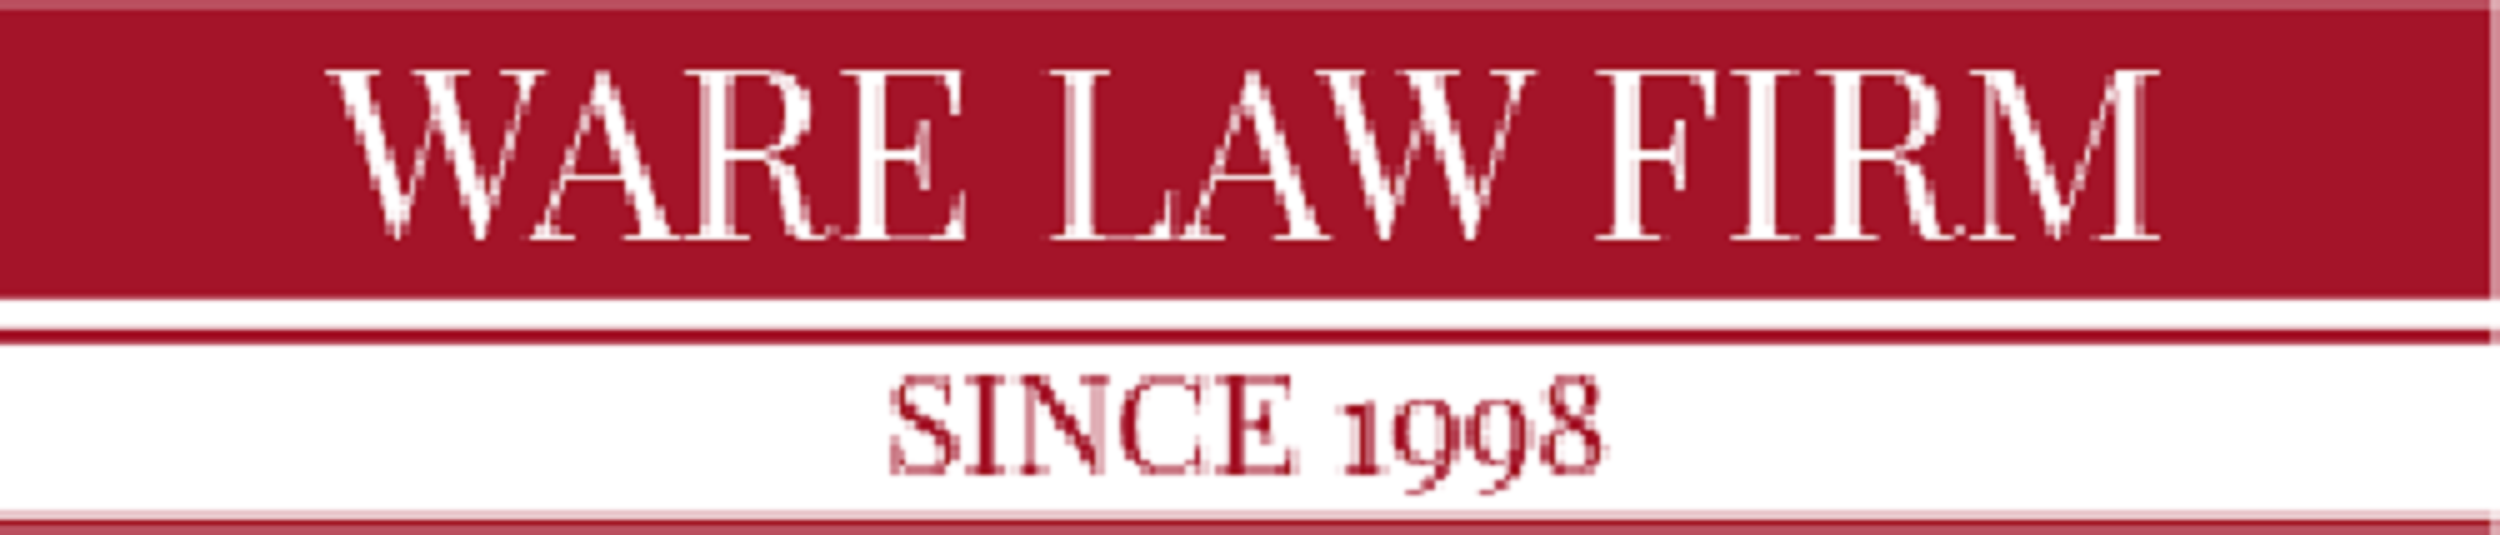 Ware Law Firm, PLLC